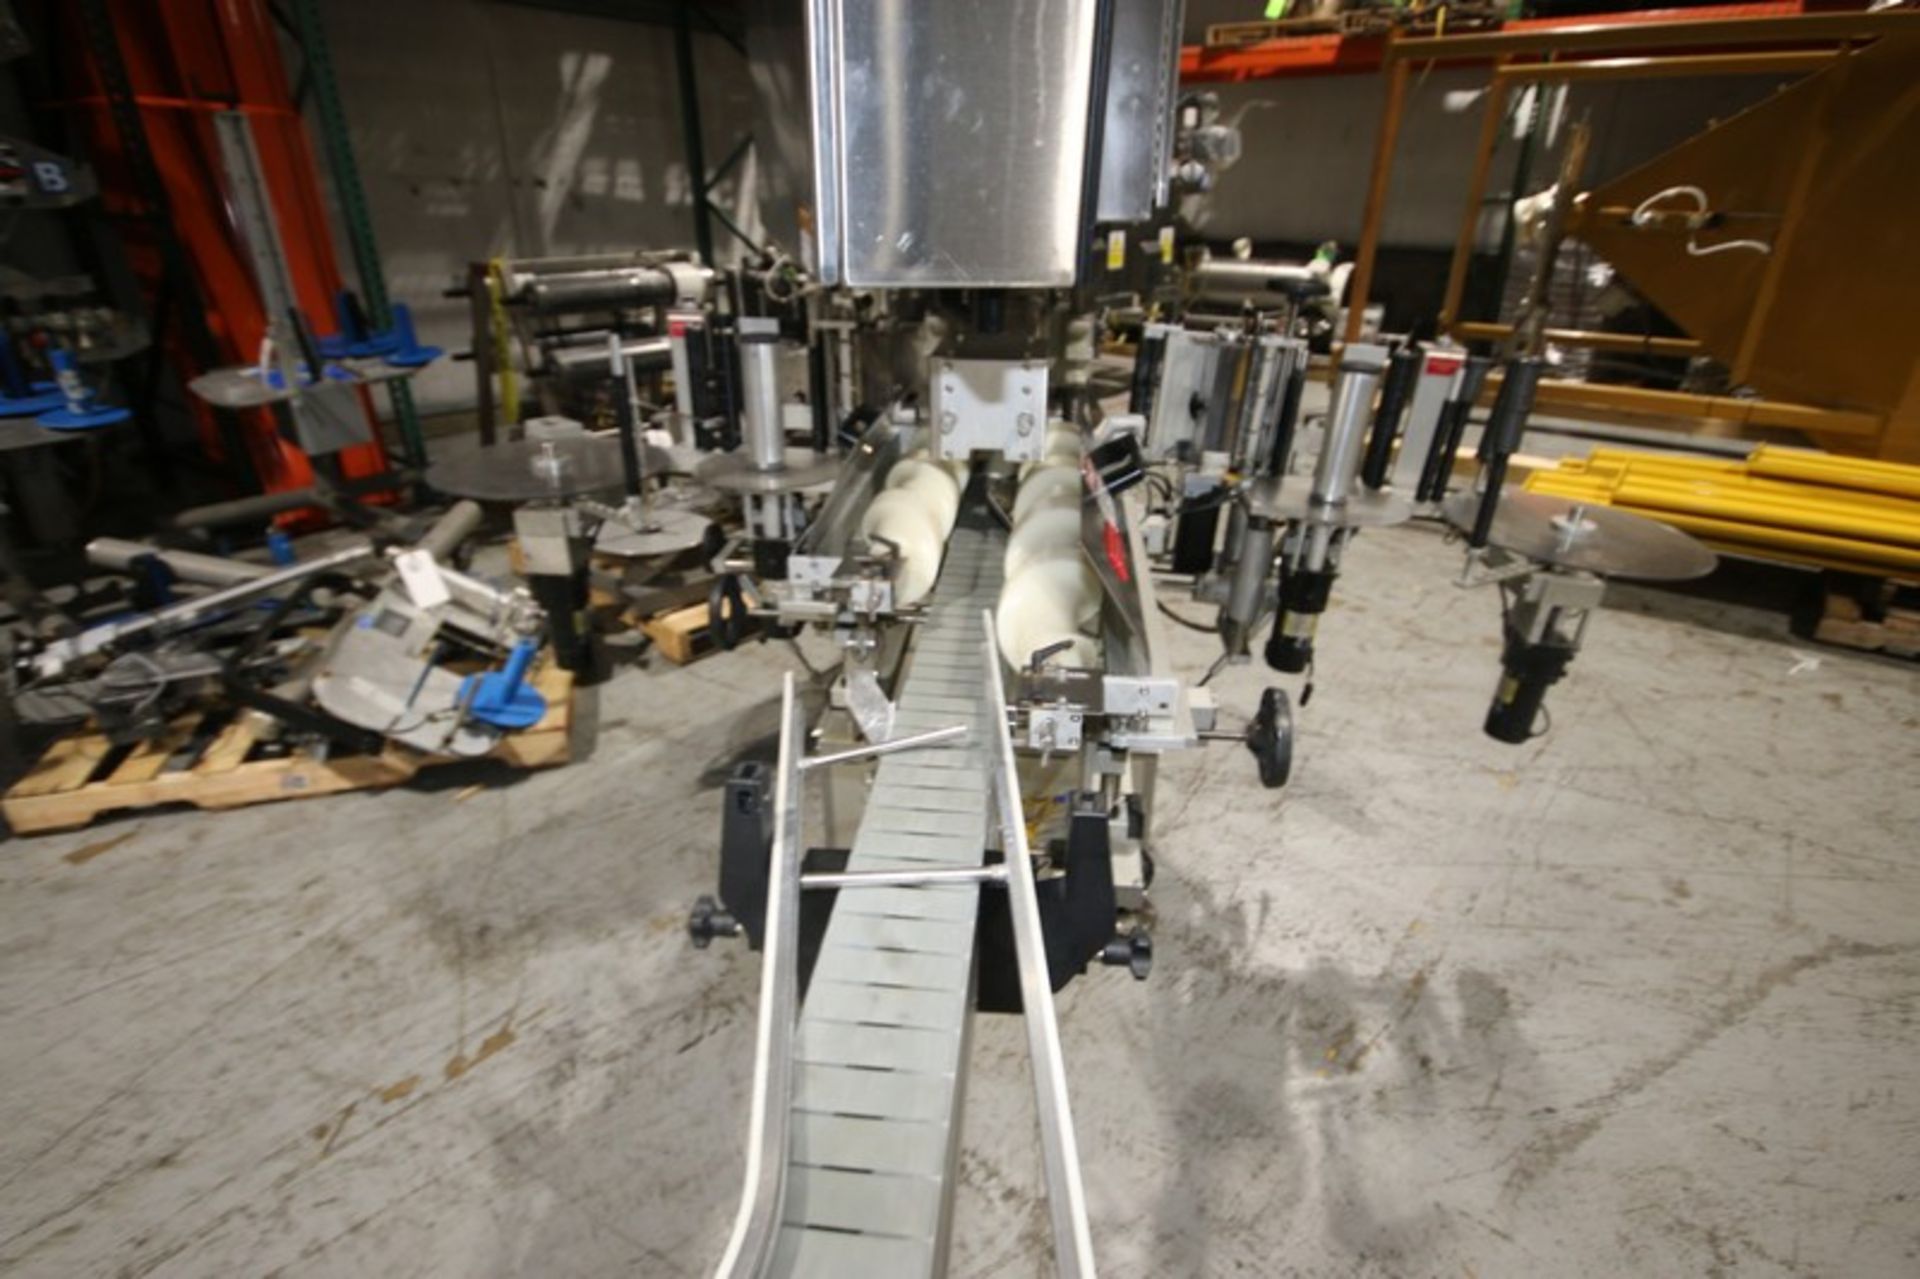 Accraply In-Line LabelerModel 9000 PW, SN 4262, with 4.5" W Conveyor, SP10 Head, Allen Bradley - Image 9 of 13